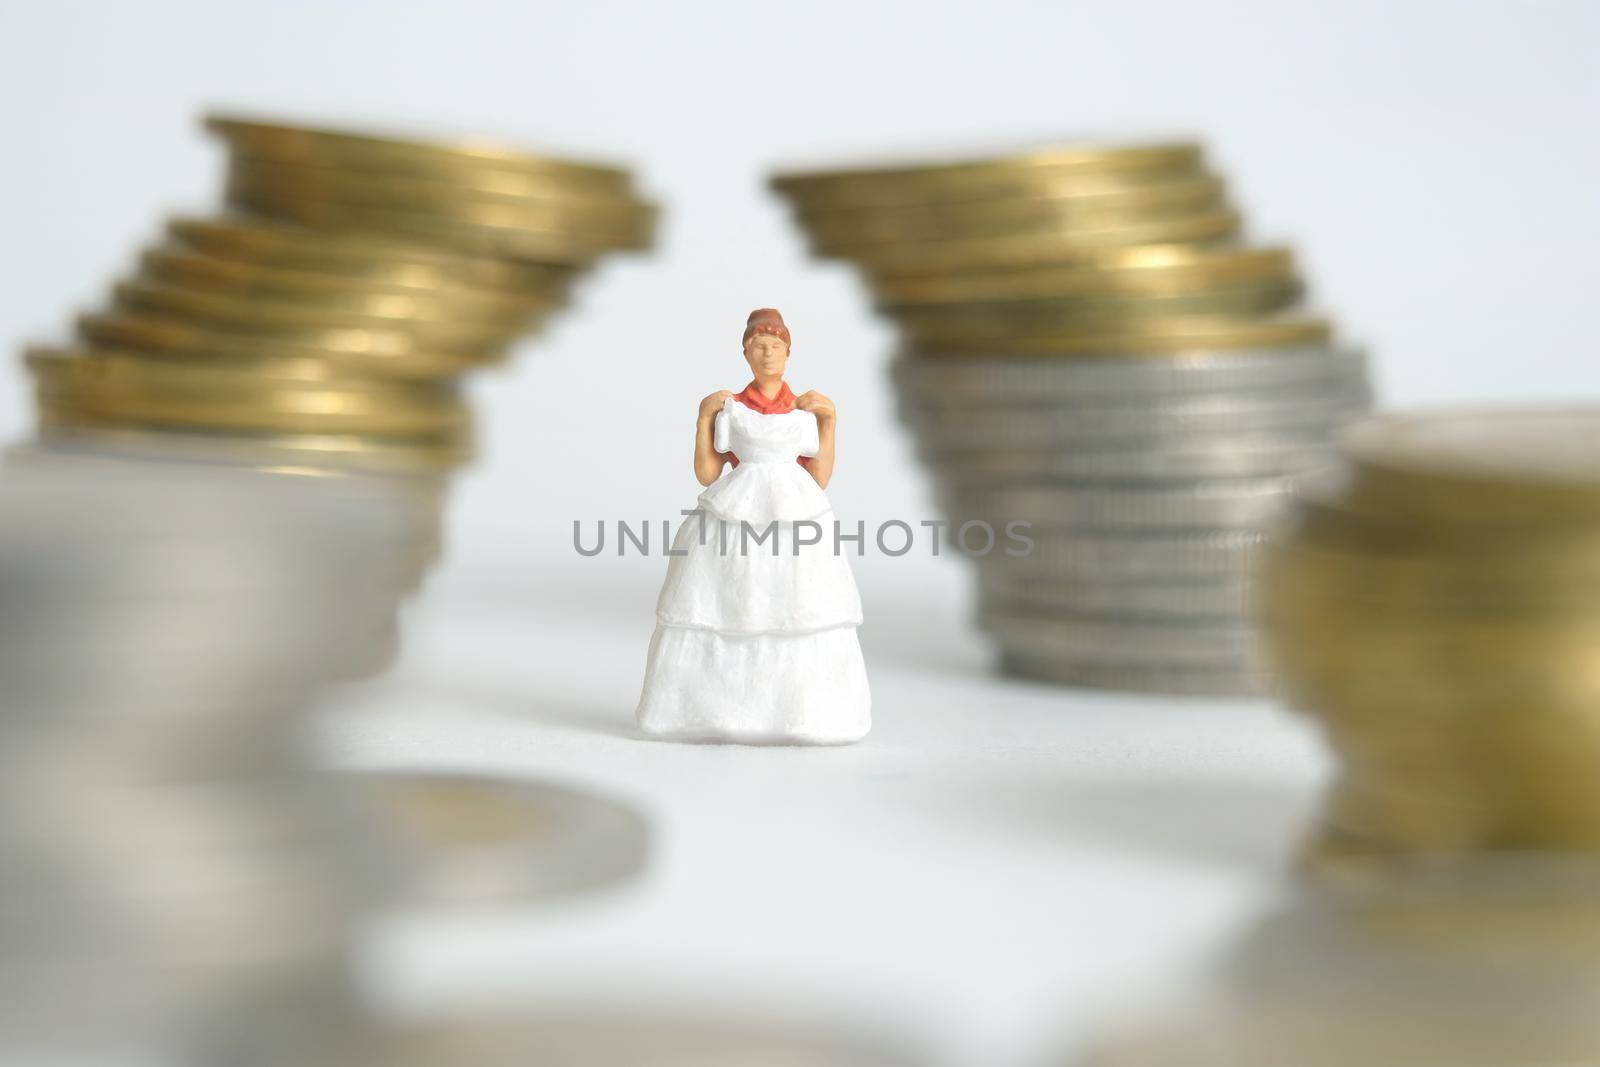 Wedding dress budget for bride, miniature people illustration concept. Woman standing between coin money stack. Image photo by Macrostud